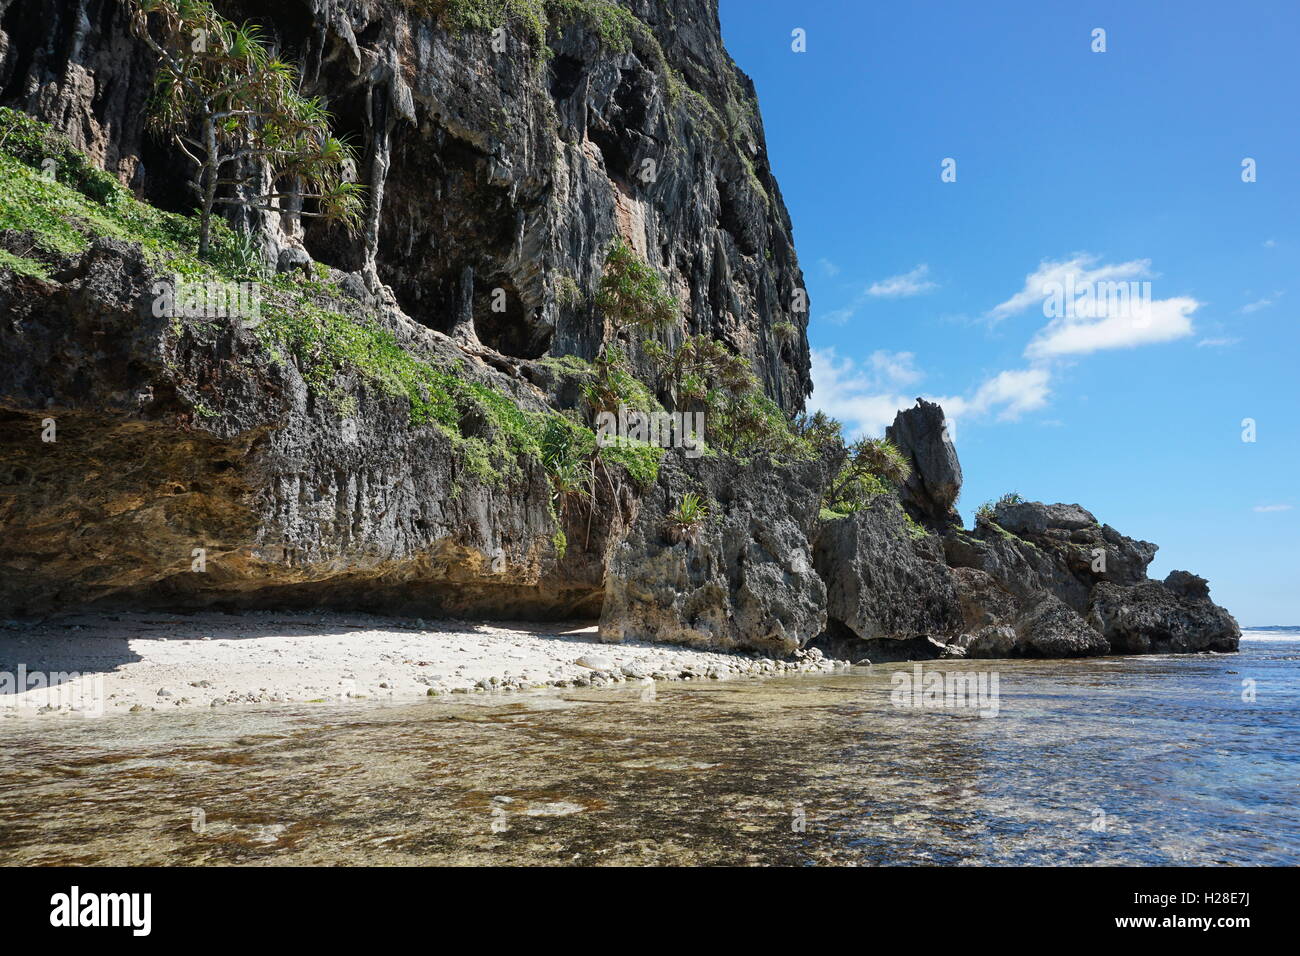 Eroded limestone cliff with cave on the shore of Rurutu island, Pacific ocean, Austral archipelago, French Polynesia Stock Photo